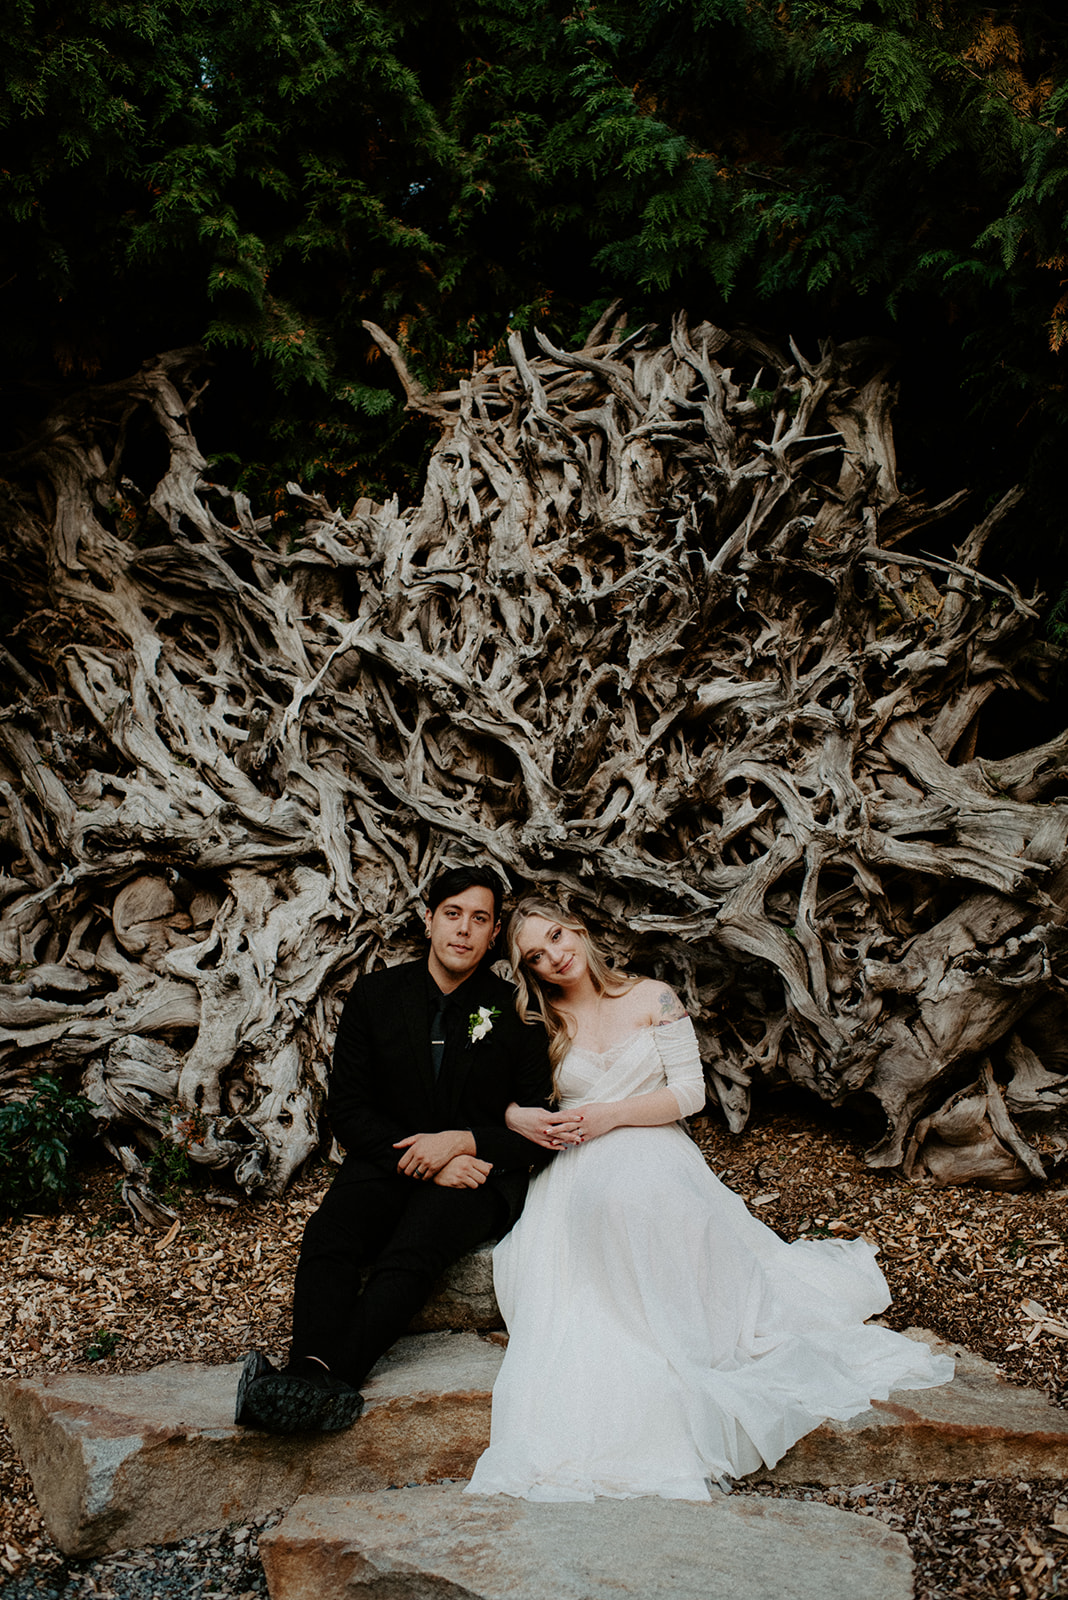 A couple sitting in front of an intricate driftwood wall, with the woman in a white dress leaning on the man in a dark suit, both looking serene and content.